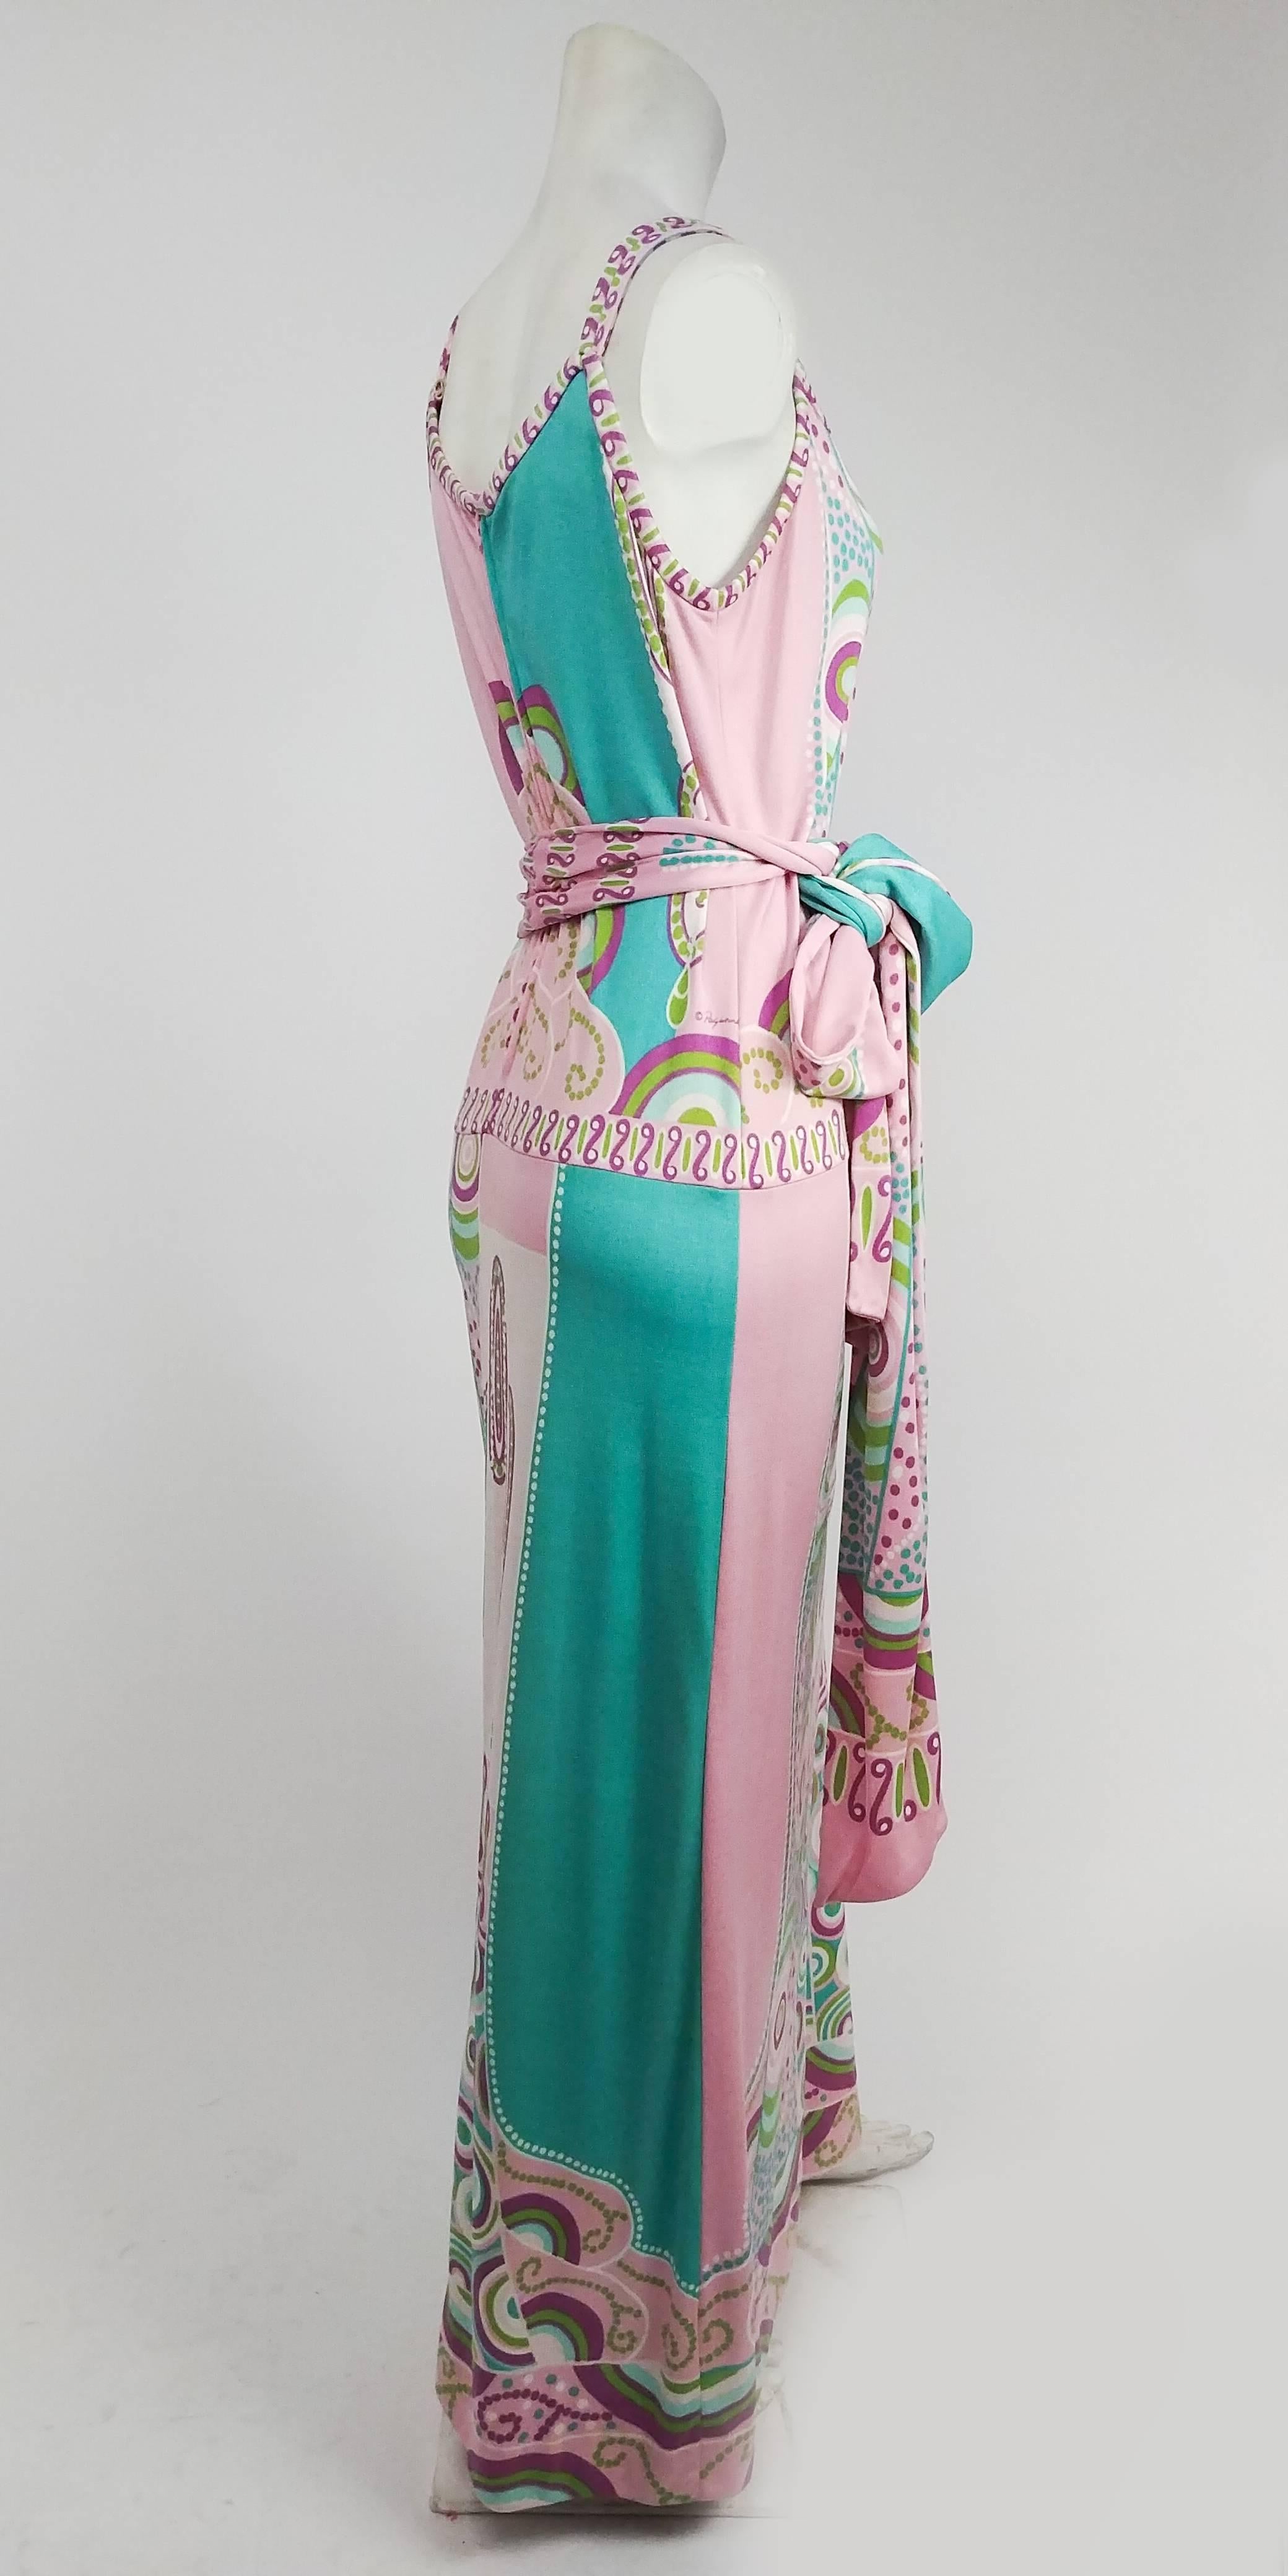 1970s Paganne Pink & Green Printed Jersey Maxi Dress. Zips up back, matching sash included. 